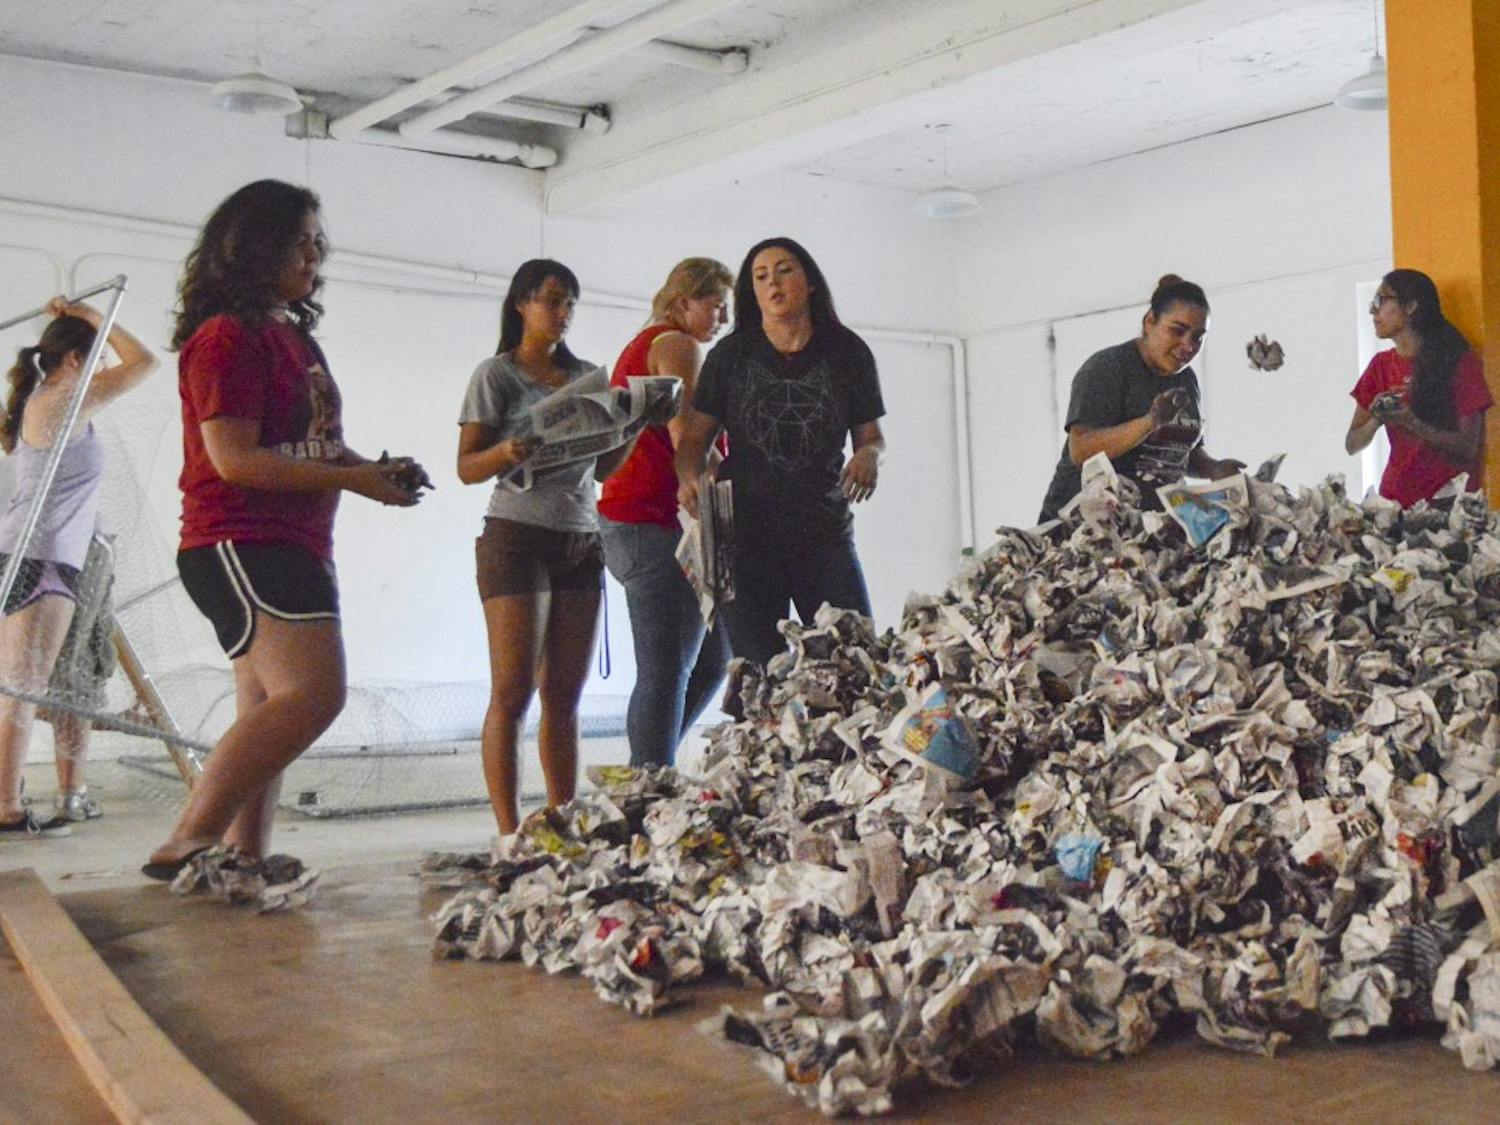 	Members of the Associated Students of the University of New Mexico and other UNM students crumple up issues of newspapers in the basement of Sigma Chi House on Tuesday afternoon to build an effigy of the New Mexico State University Aggie. The Aggie effigy will be burned during Red Rally at Johnson Field on Sept. 18 at 8 p.m.